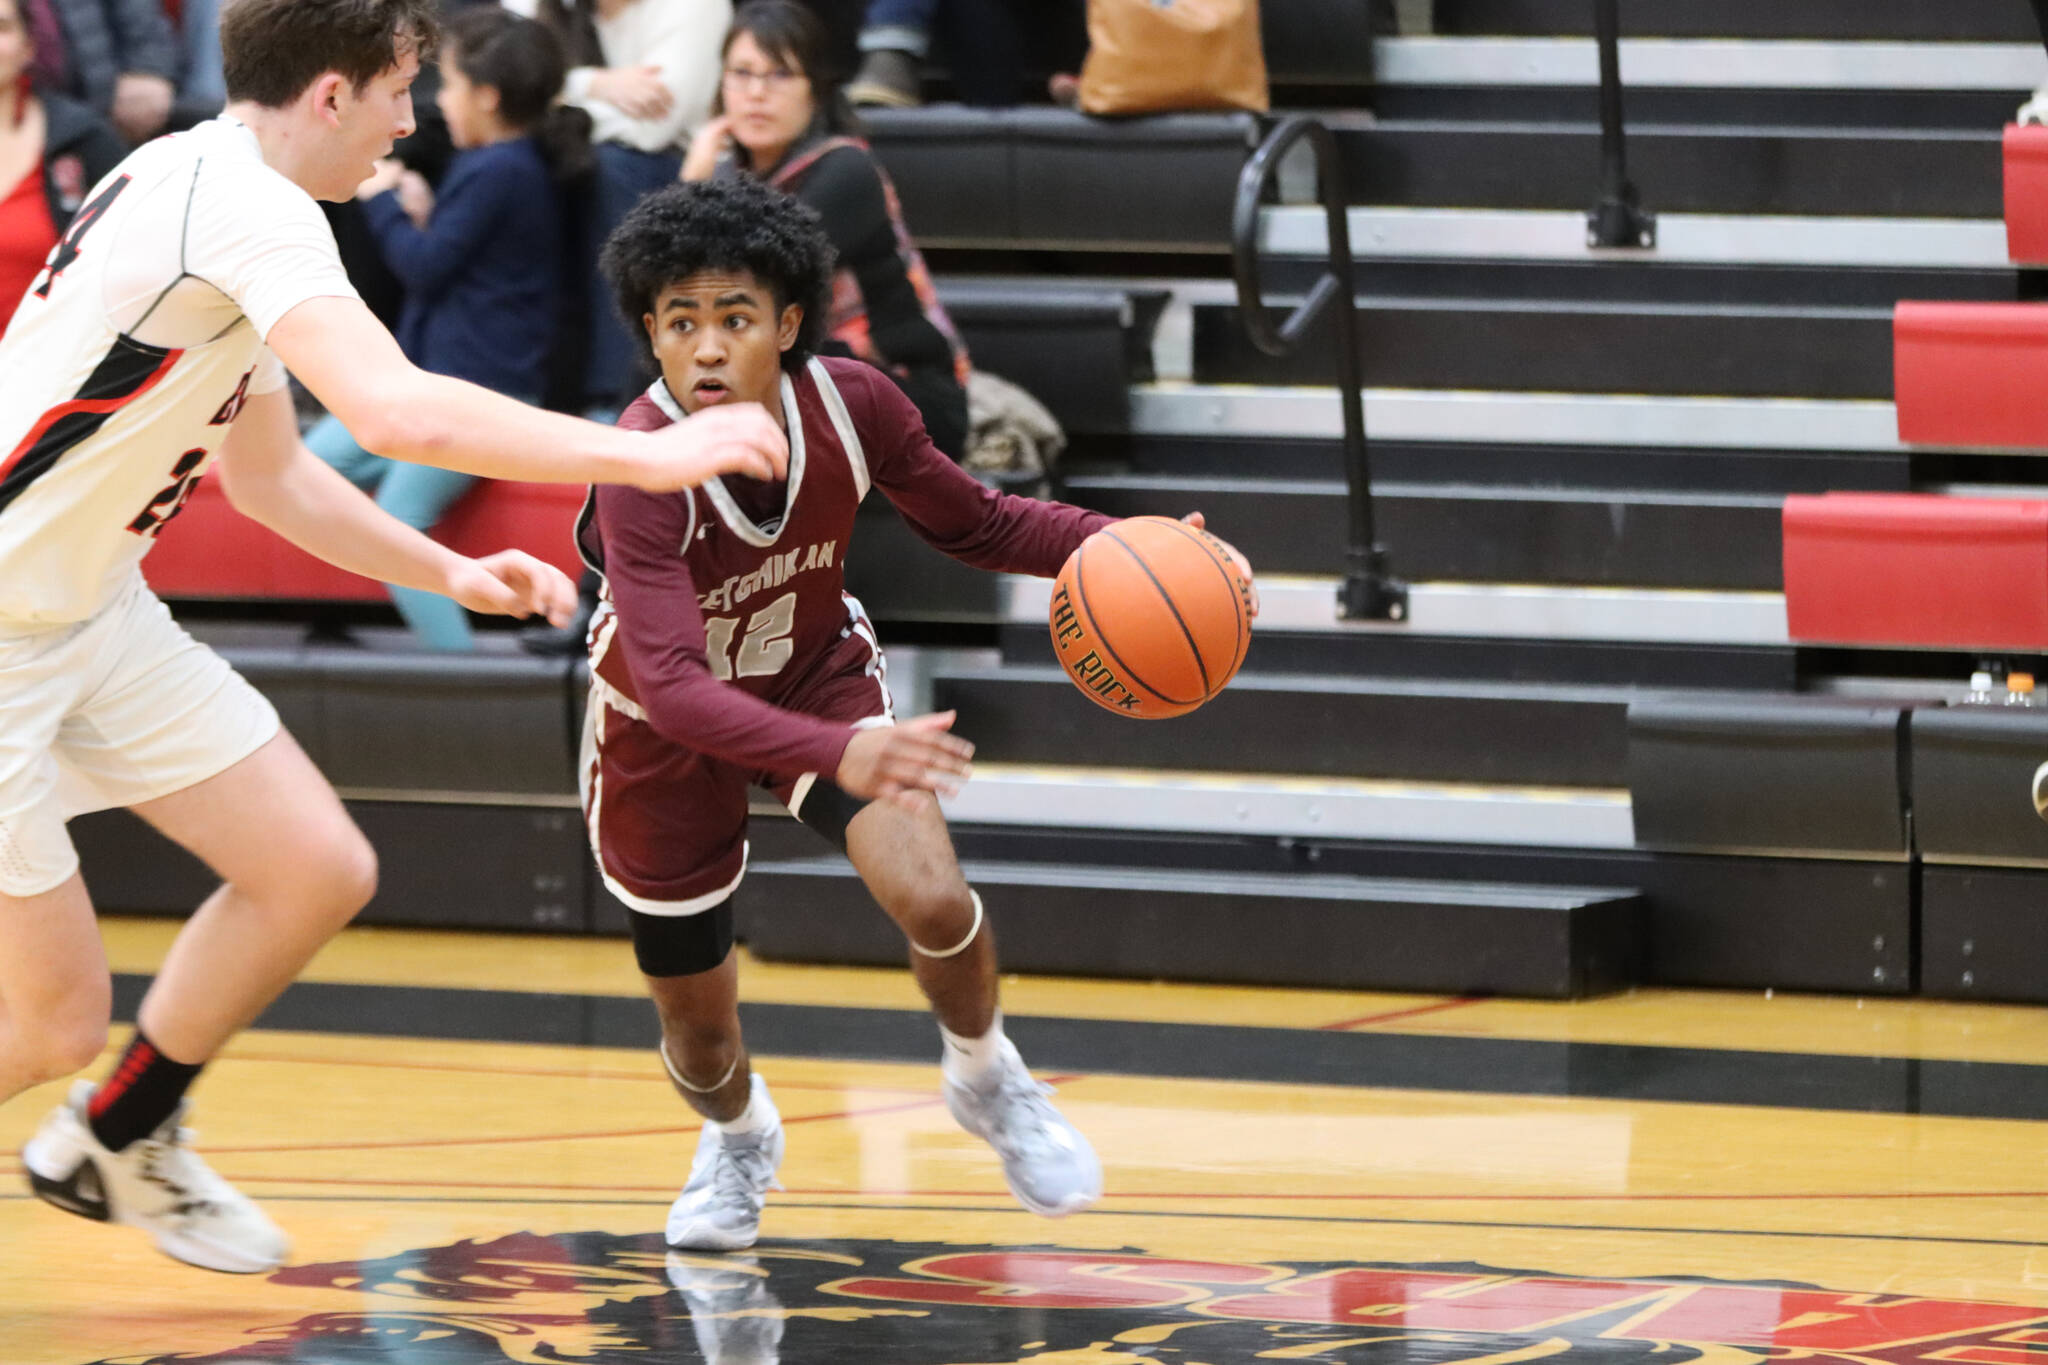 Ketchikan’s JJ Parker takes the ball down court against JDHS in a conference game earlier this season. The two teams are set to face off again for this year’s Region V Tournament. (Jonson Kuhn / Juneau Empire)